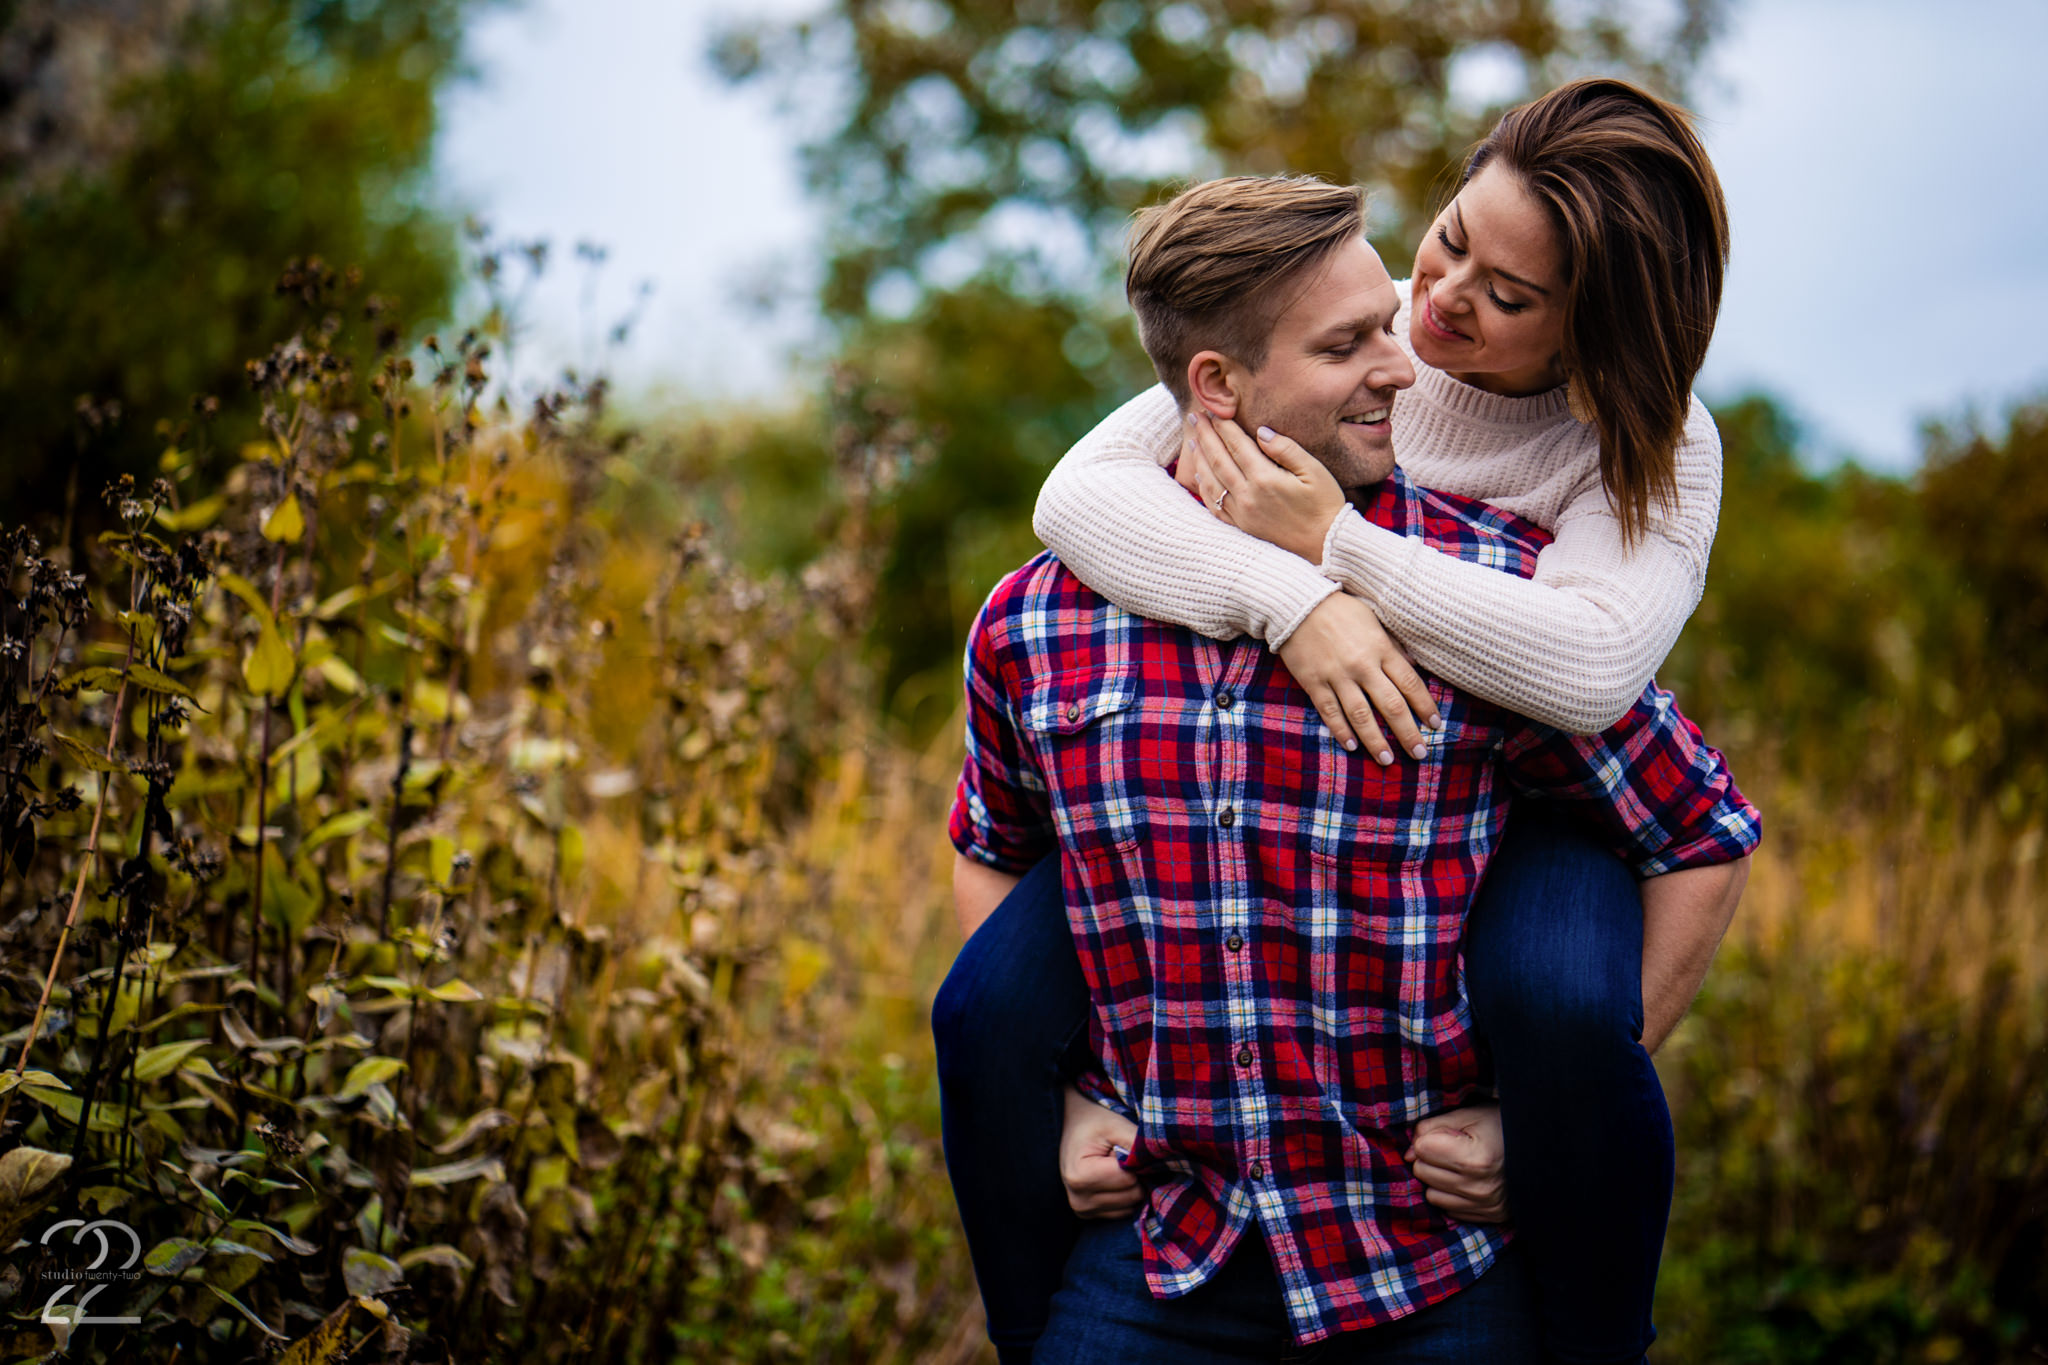  Whether walking in downtown Dayton, cuddling to stay warm in the frigid temperatures of Iceland, or going for a piggyback ride in Chicago Megan at Studio 22 Photography is ready to capture your story. 